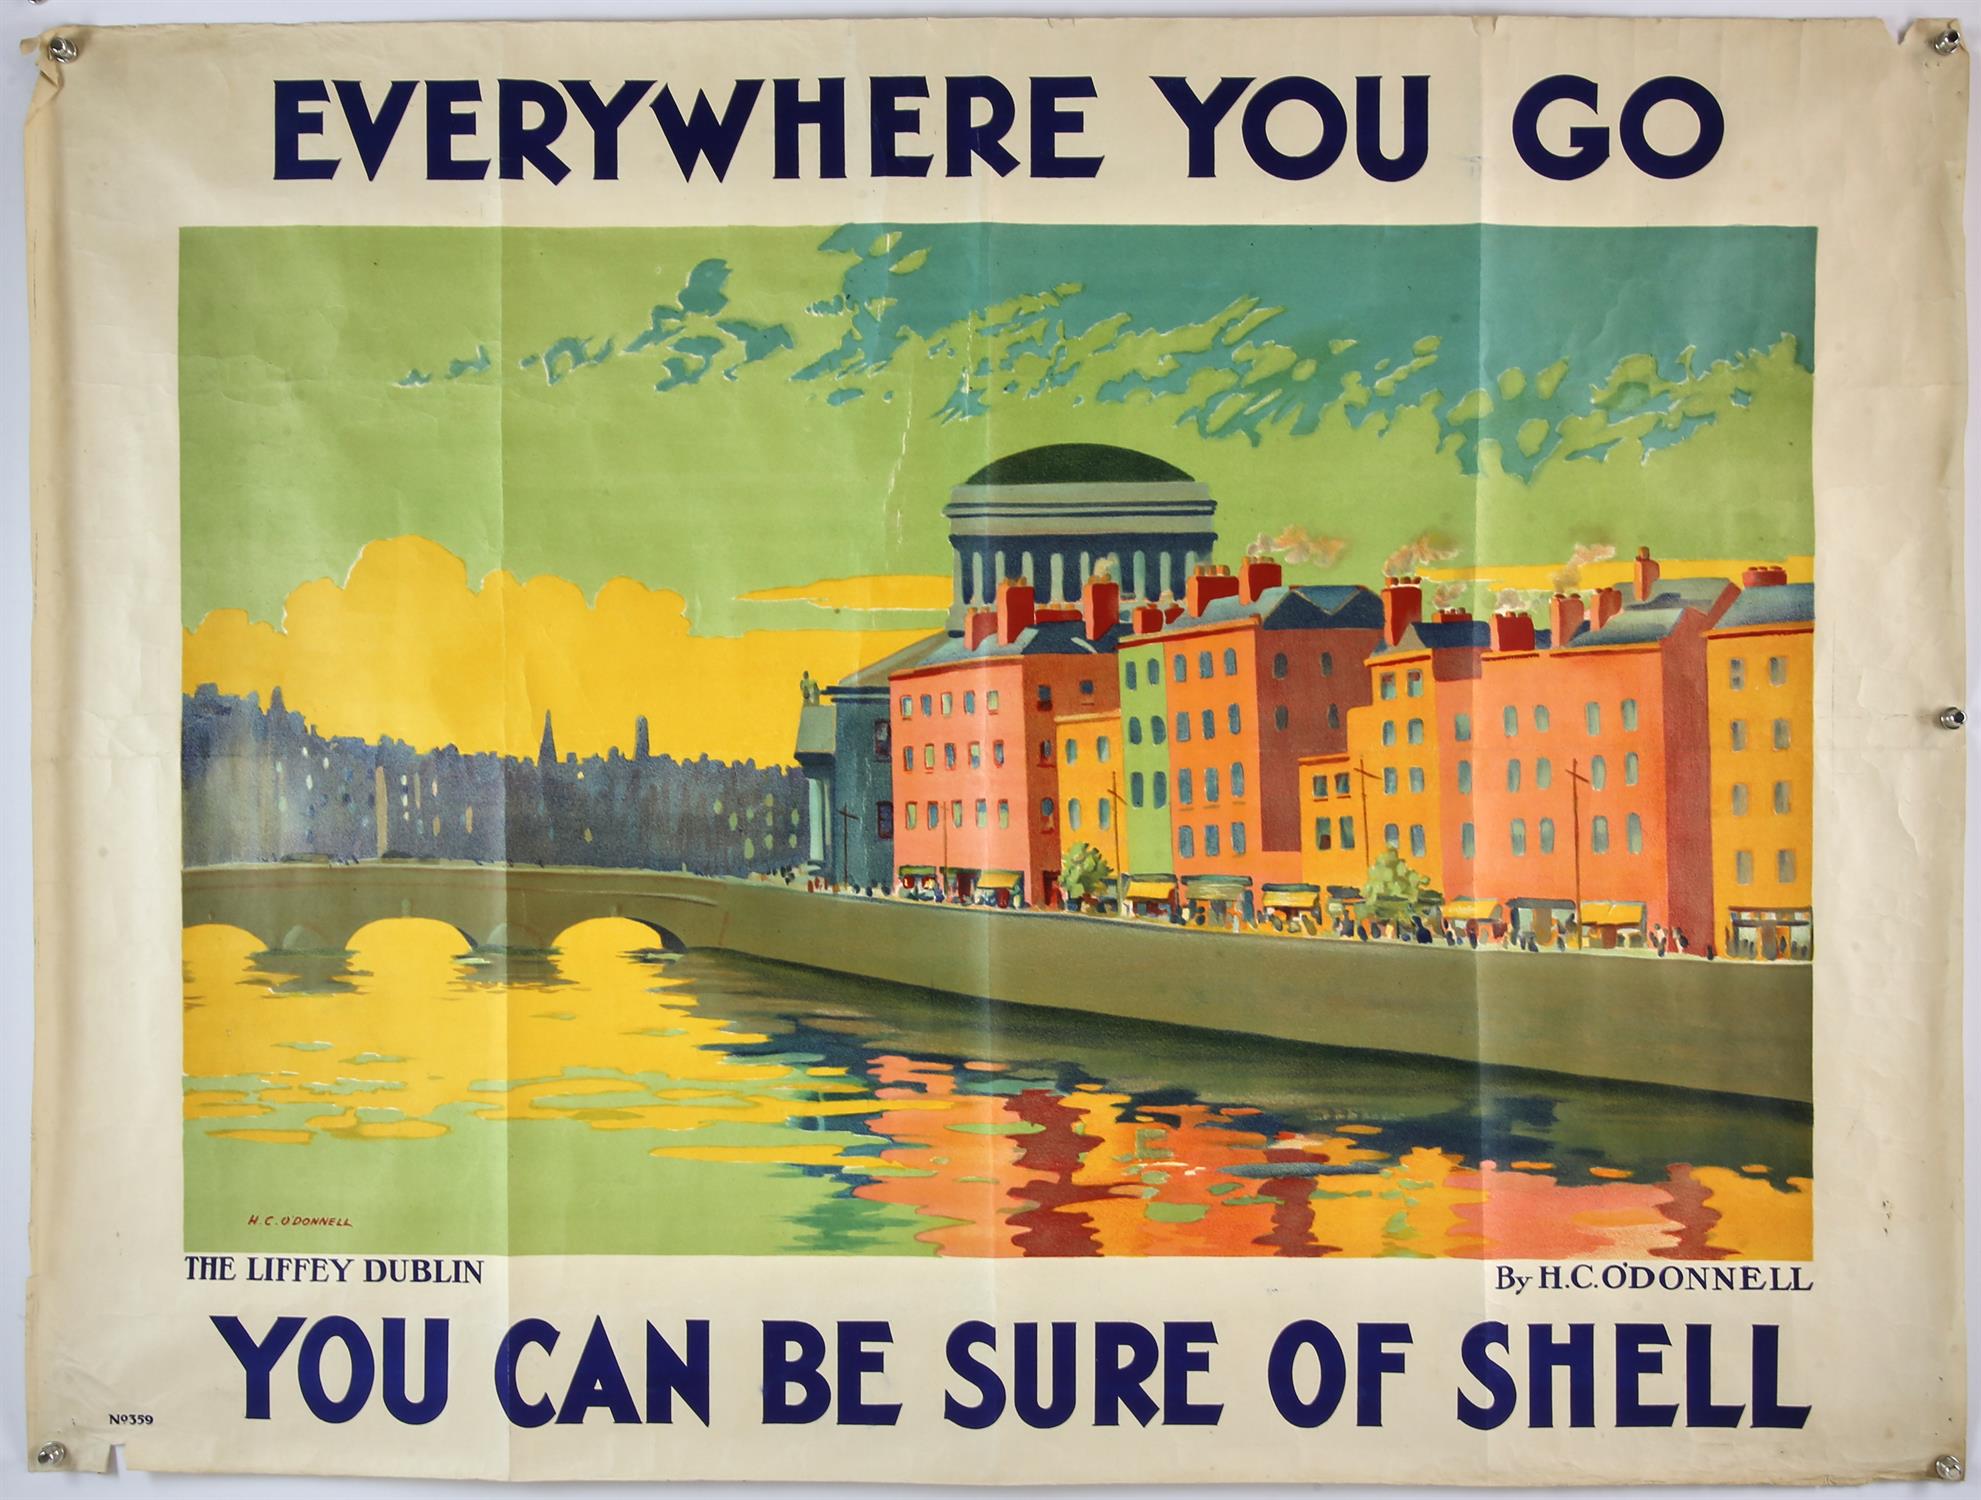 Everywhere You Go You can be sure of Shell - Vintage advertising poster, The Liffey Dublin,